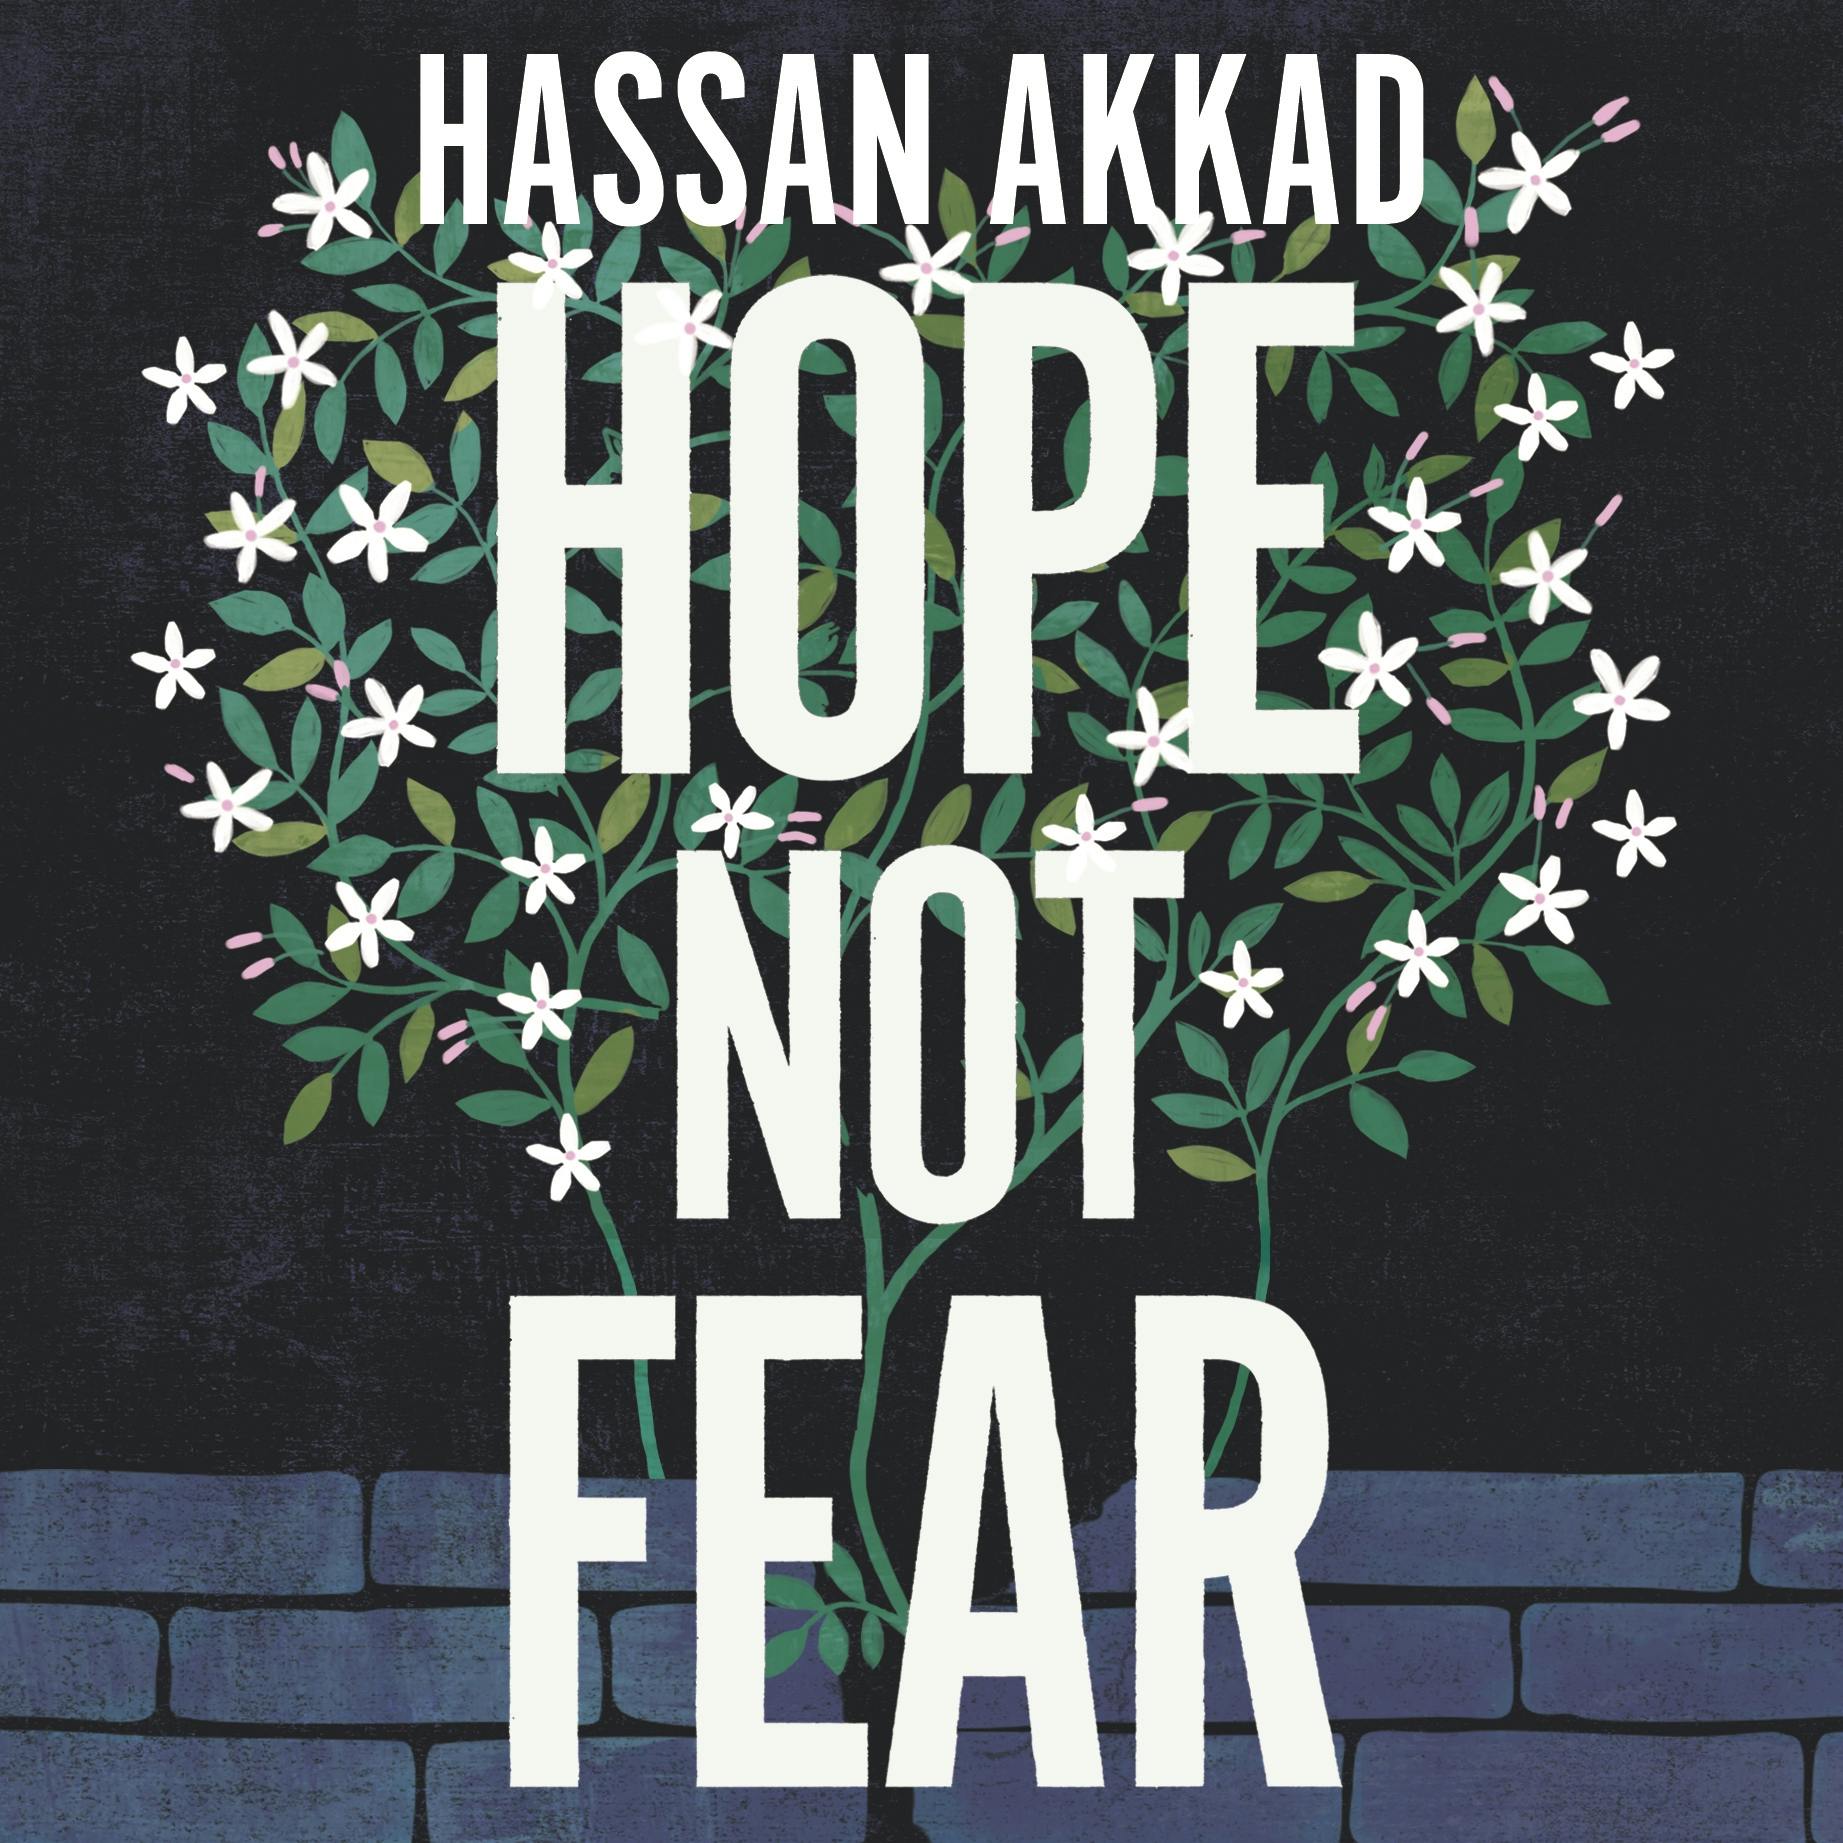 Hope Not Fear: Finding My Way from Refugee to Filmmaker to NHS Hospital Cleaner and Activist - Hassan Akkad